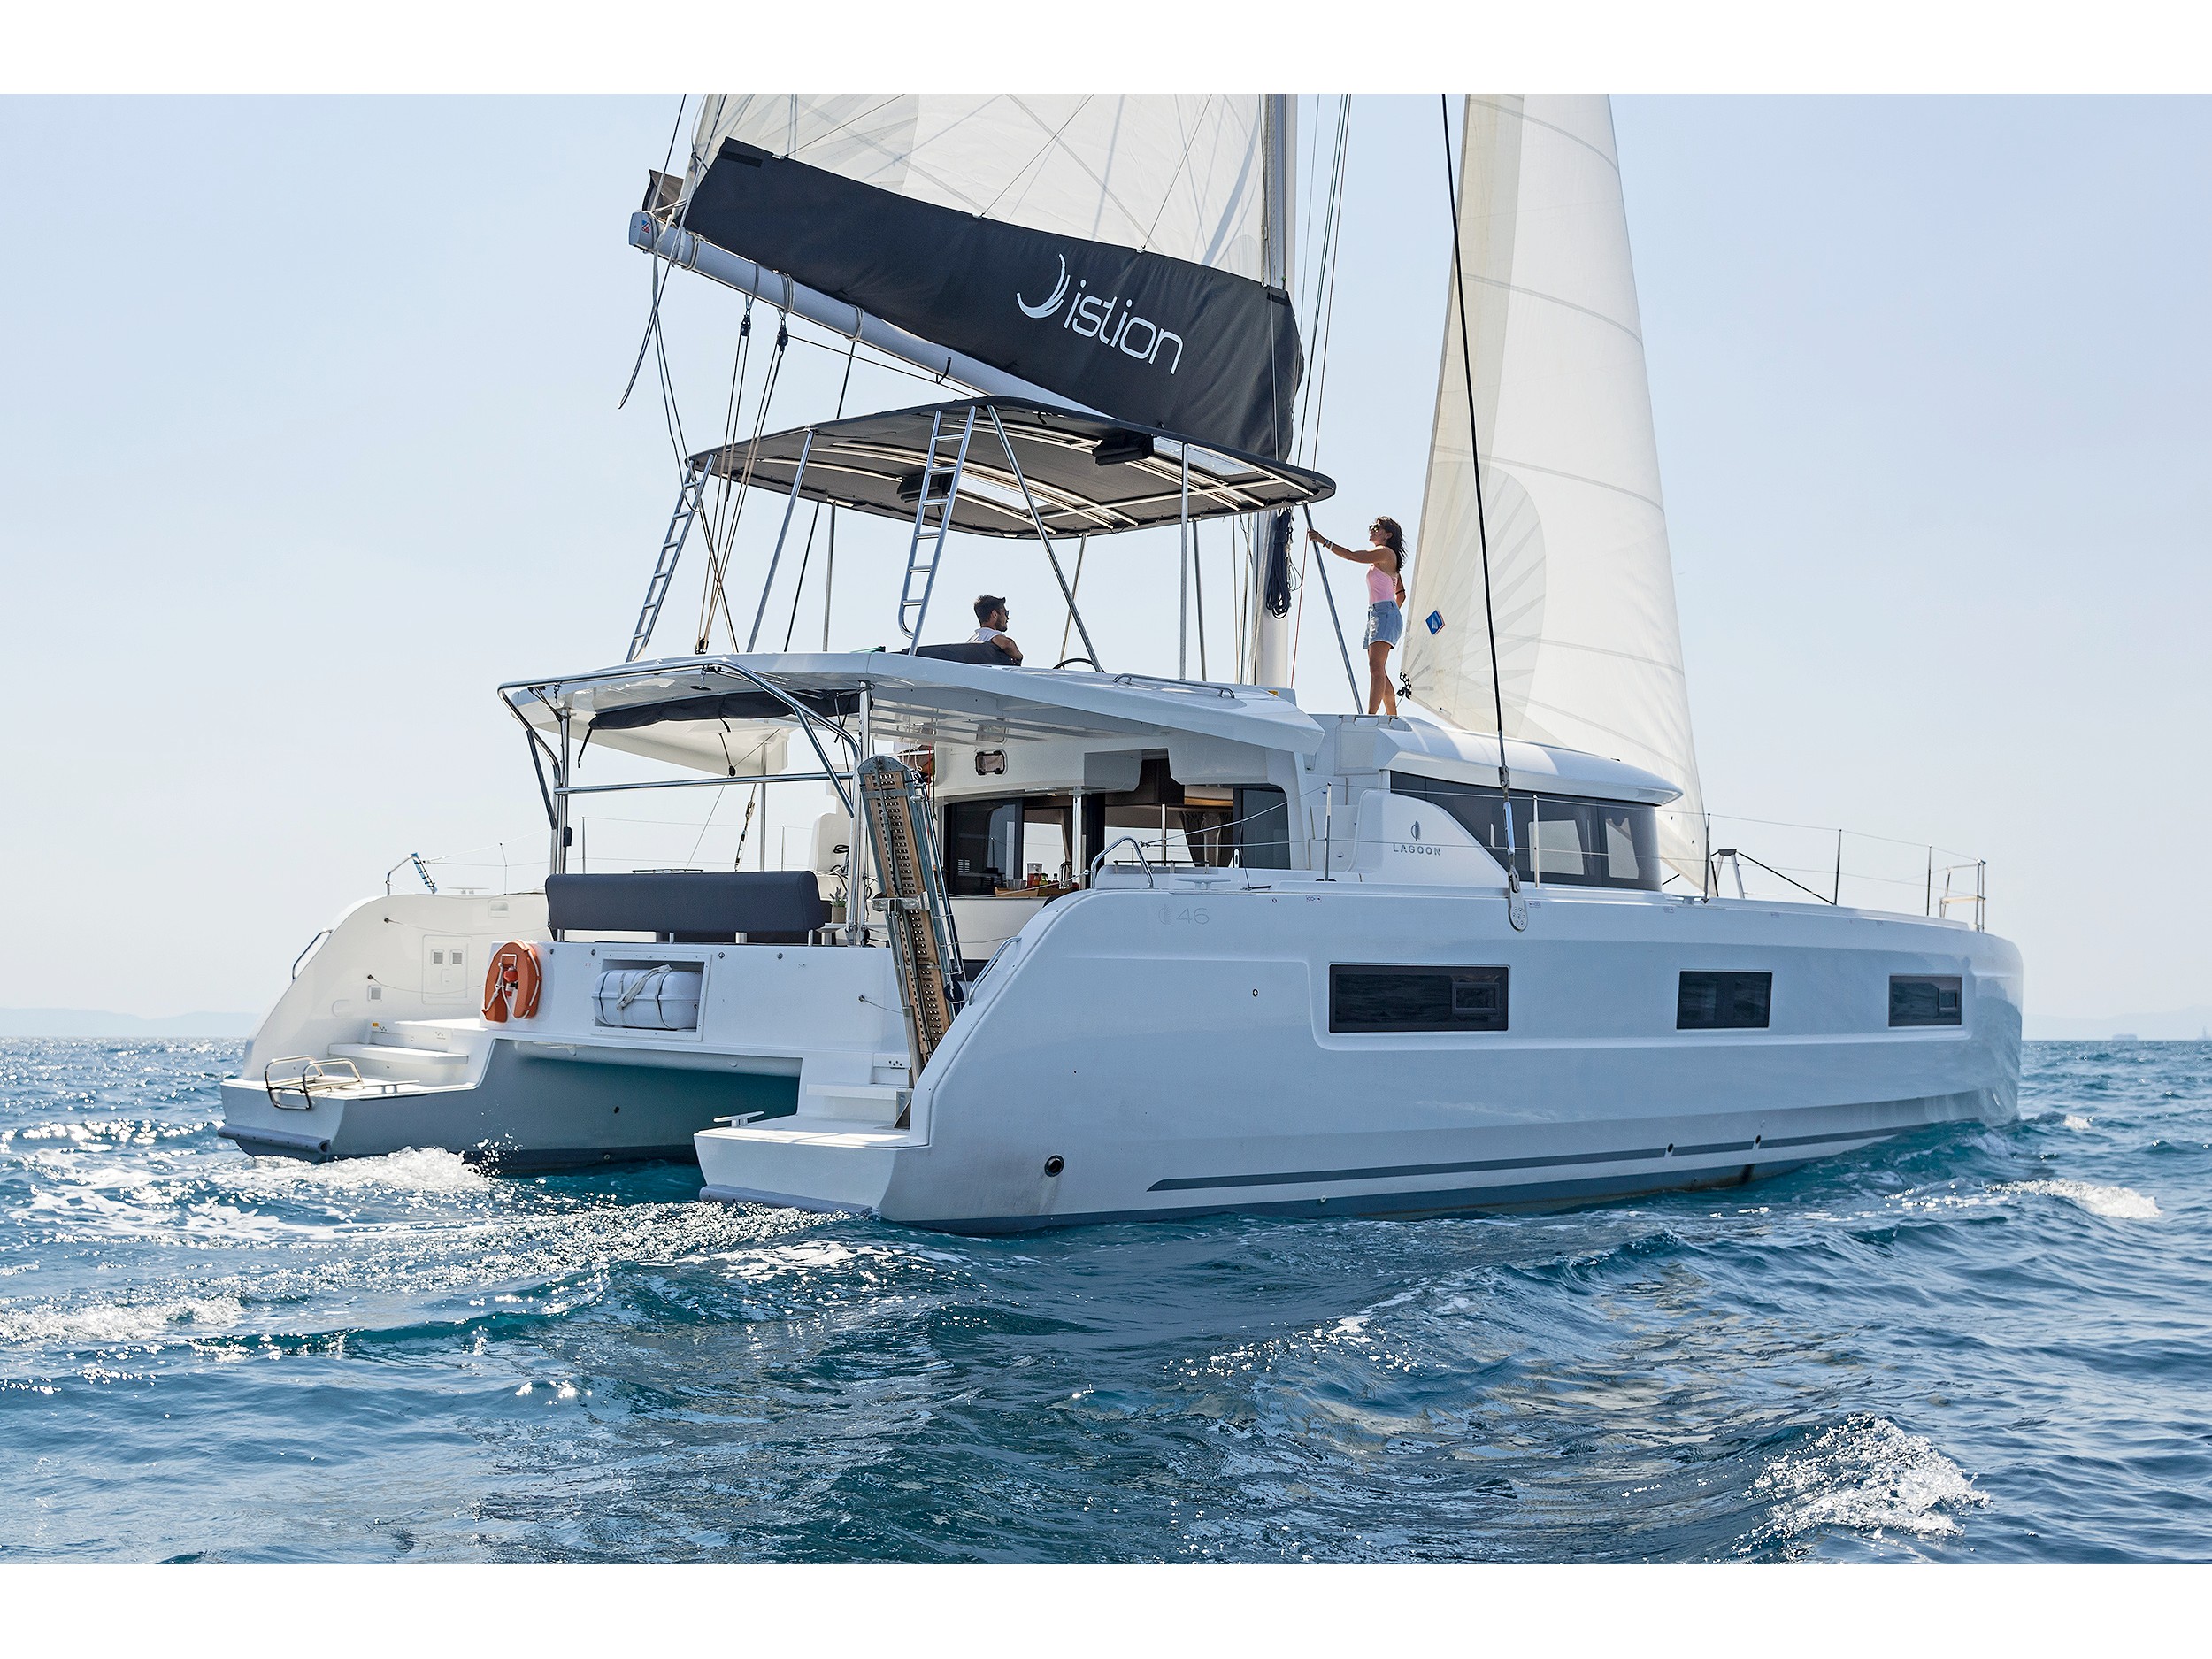 Lagoon 46  - Superyacht charter Italy & Boat hire in Greece Athens and Saronic Gulf Athens Alimos Alimos Marina 2